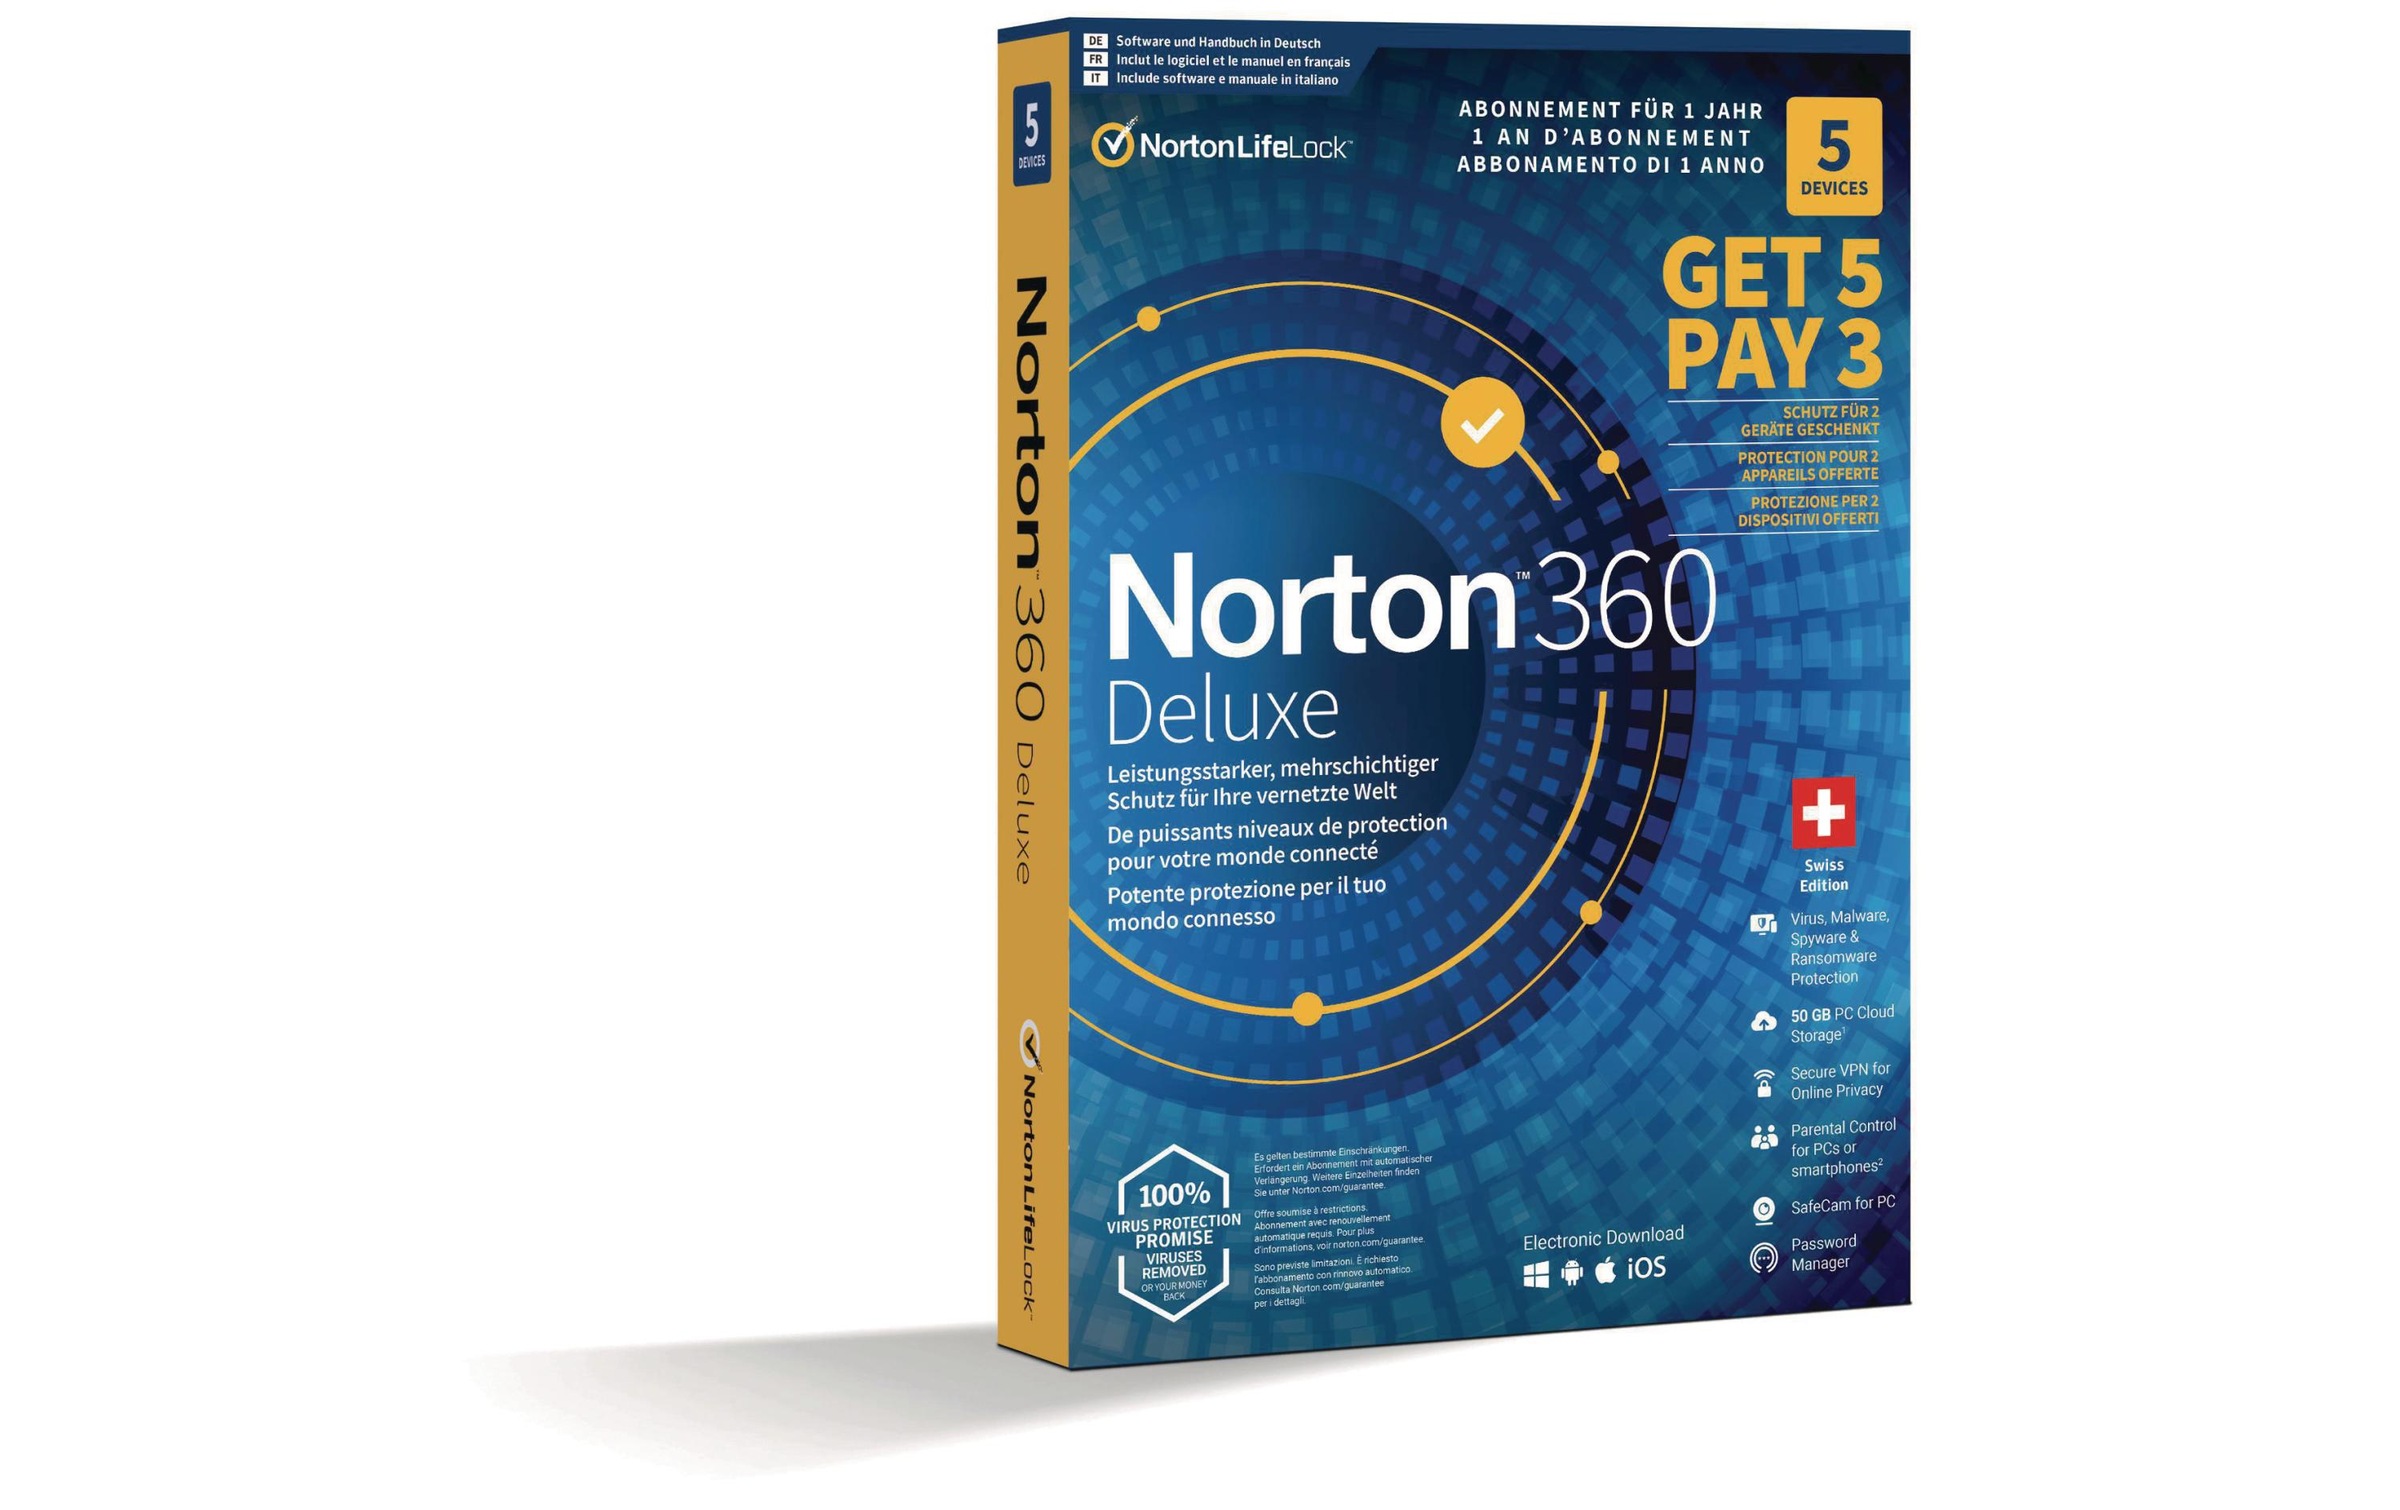 Norton Virensoftware »360 Deluxe - Promotion Box,«